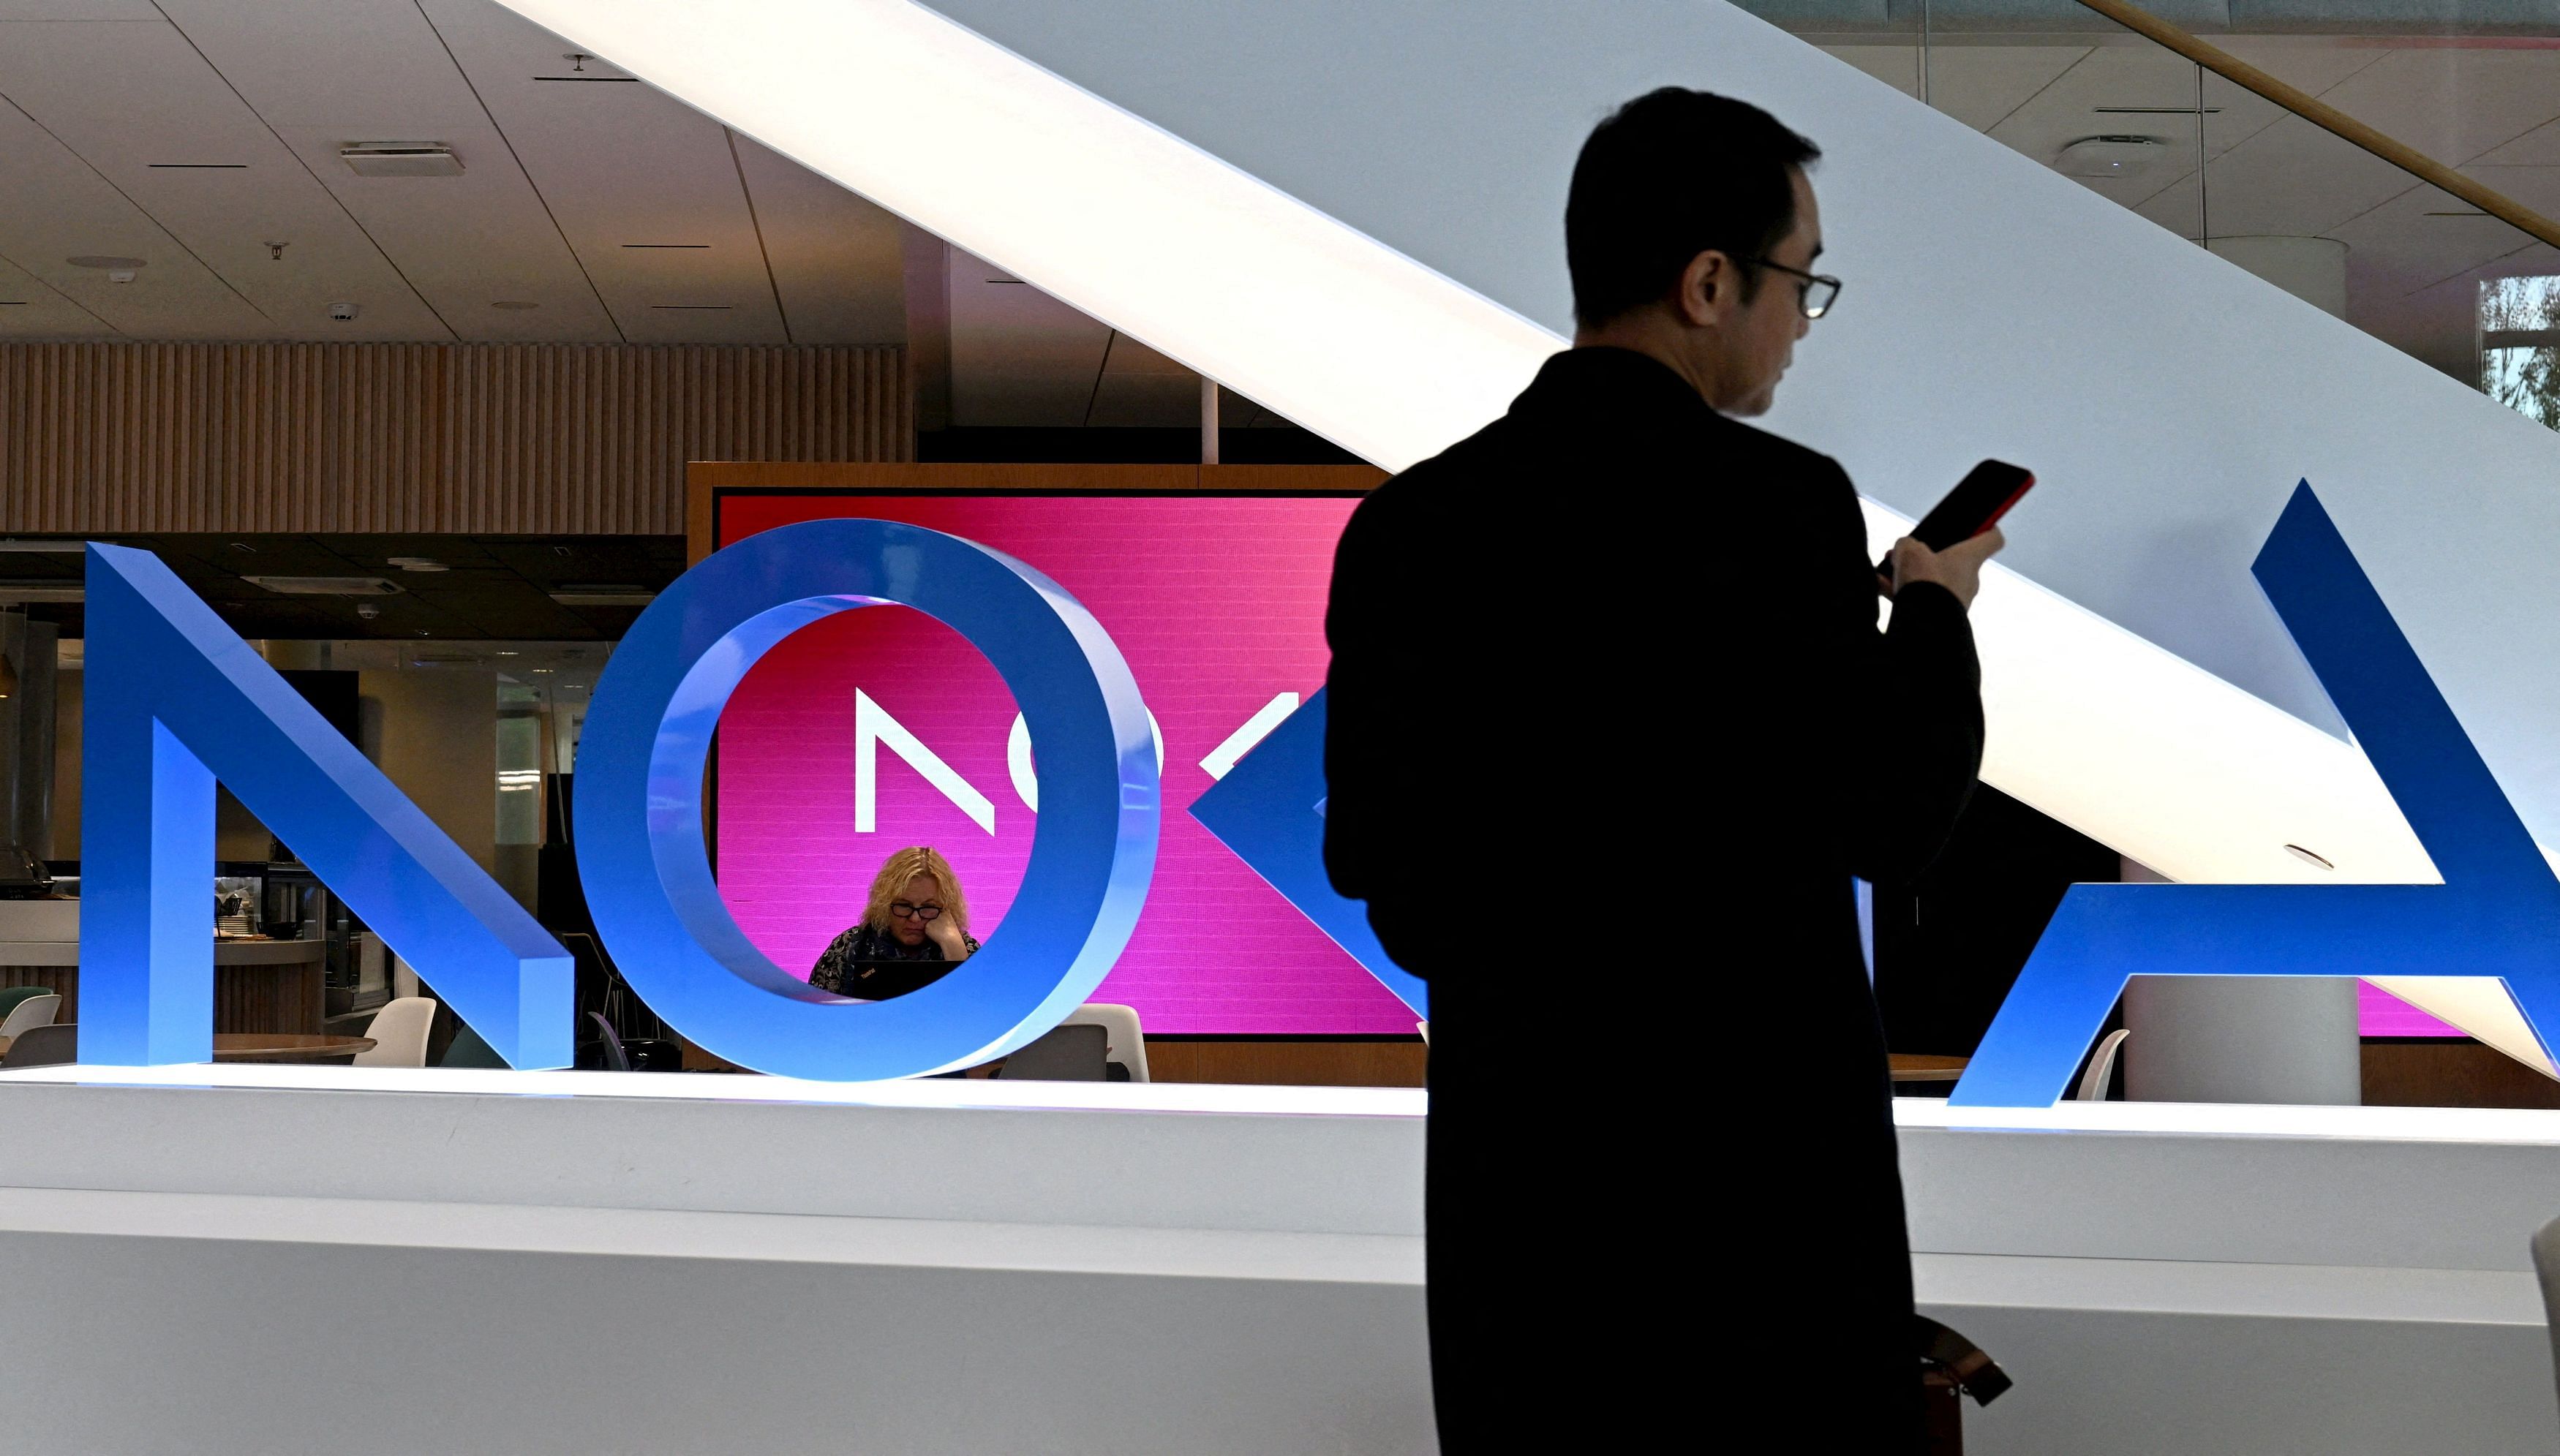 <div class="paragraphs"><p>An image showing a man standing in front of the Nokia logo.</p></div>